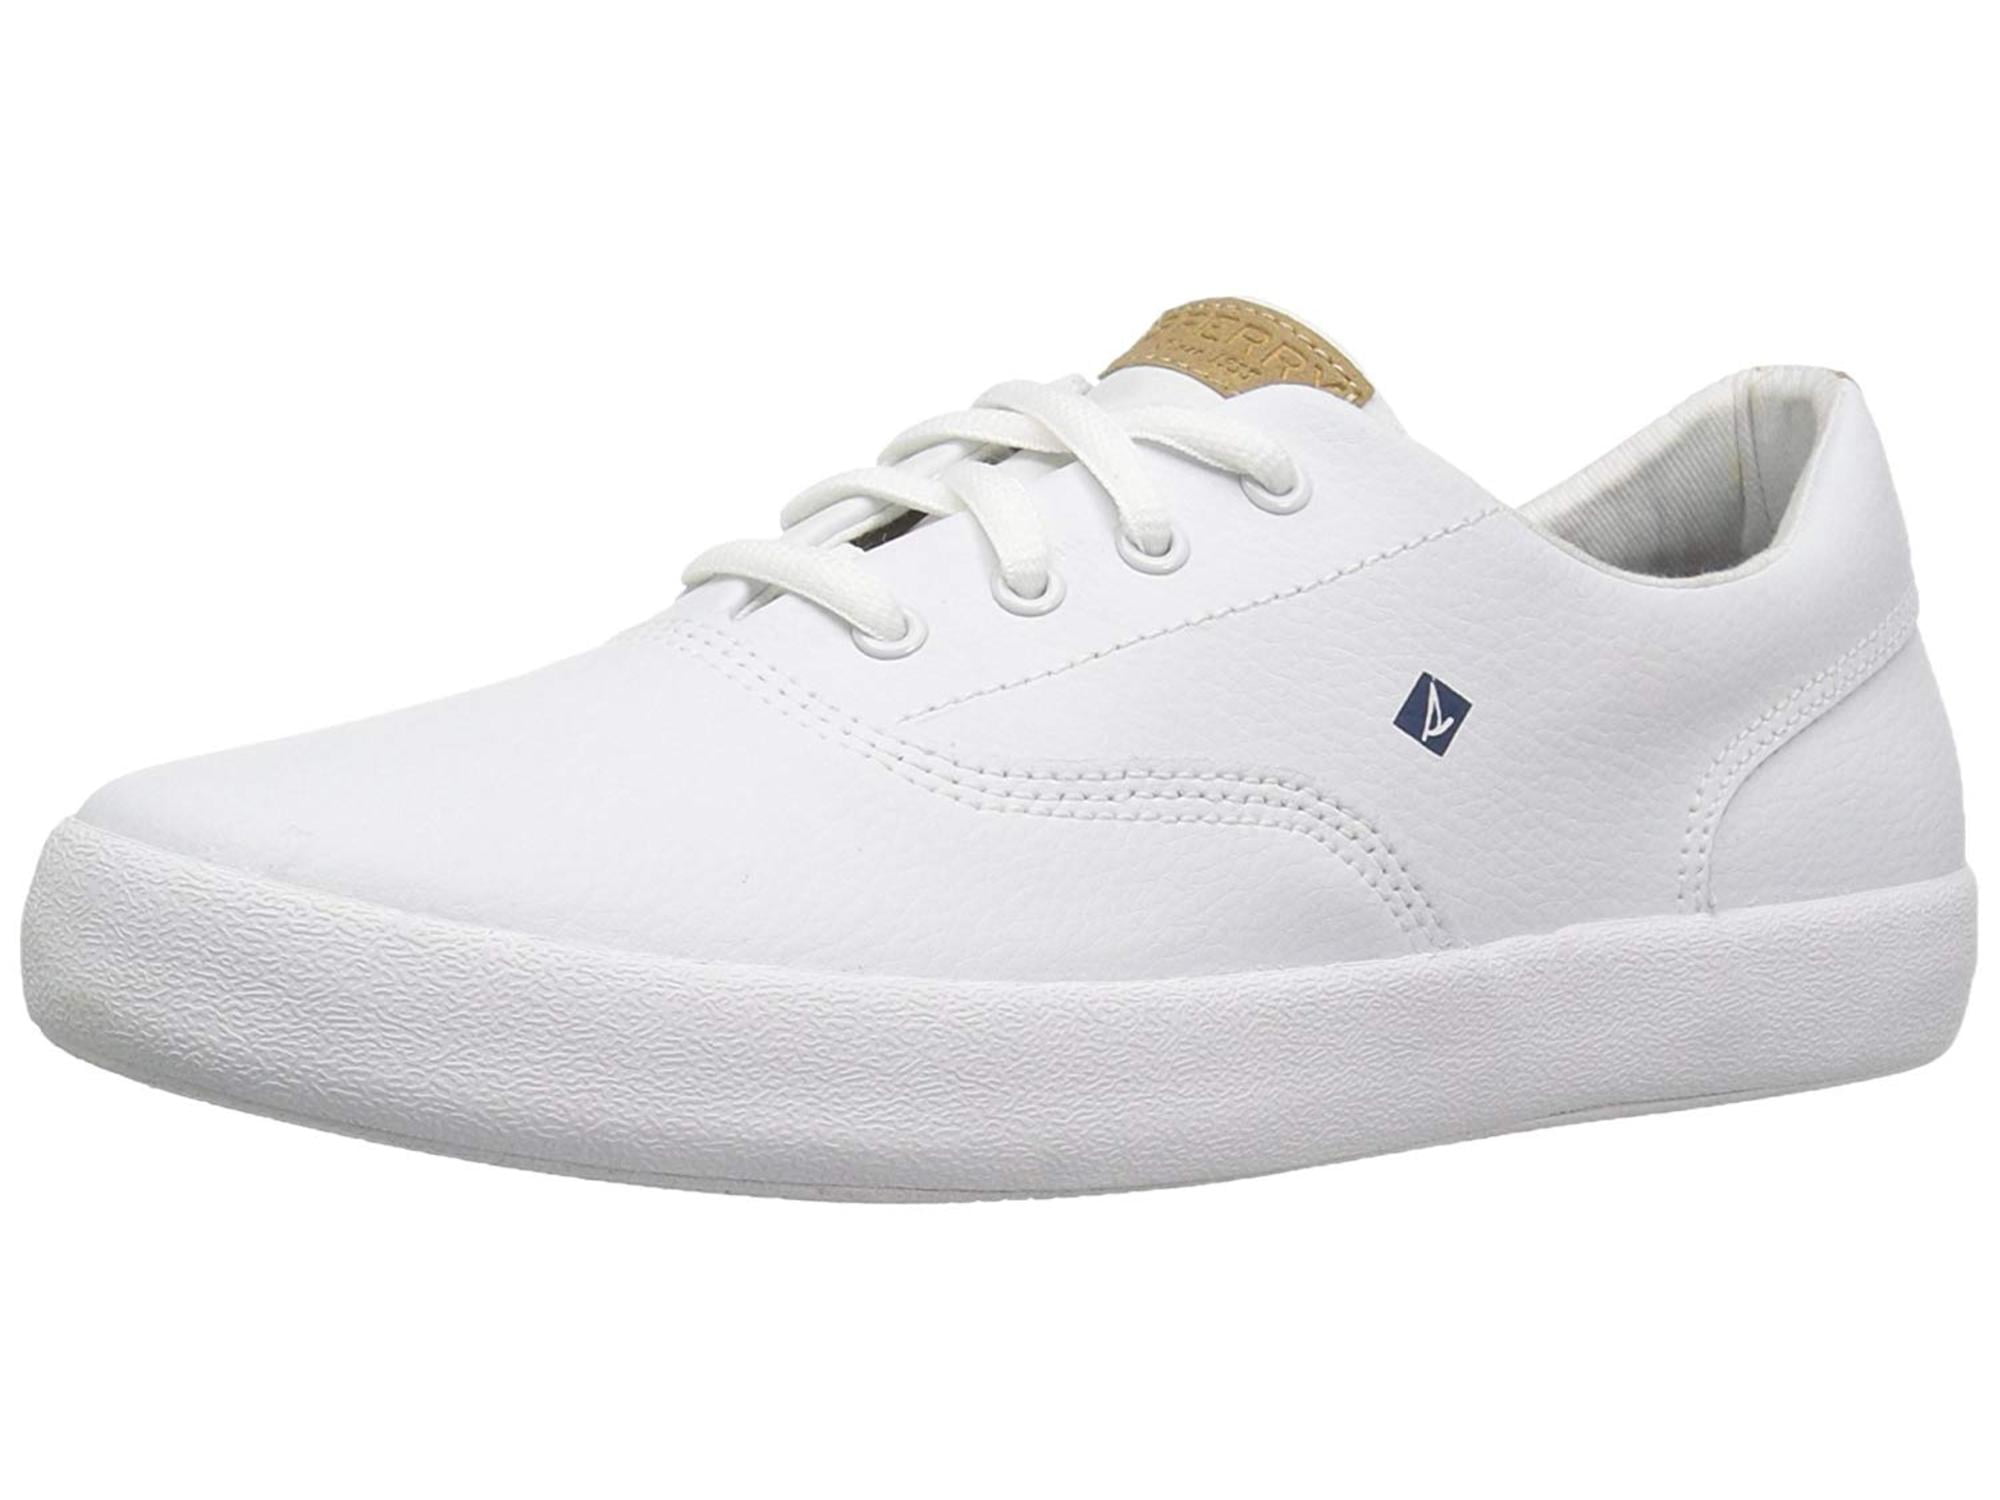 sperry wahoo white leather sneaker